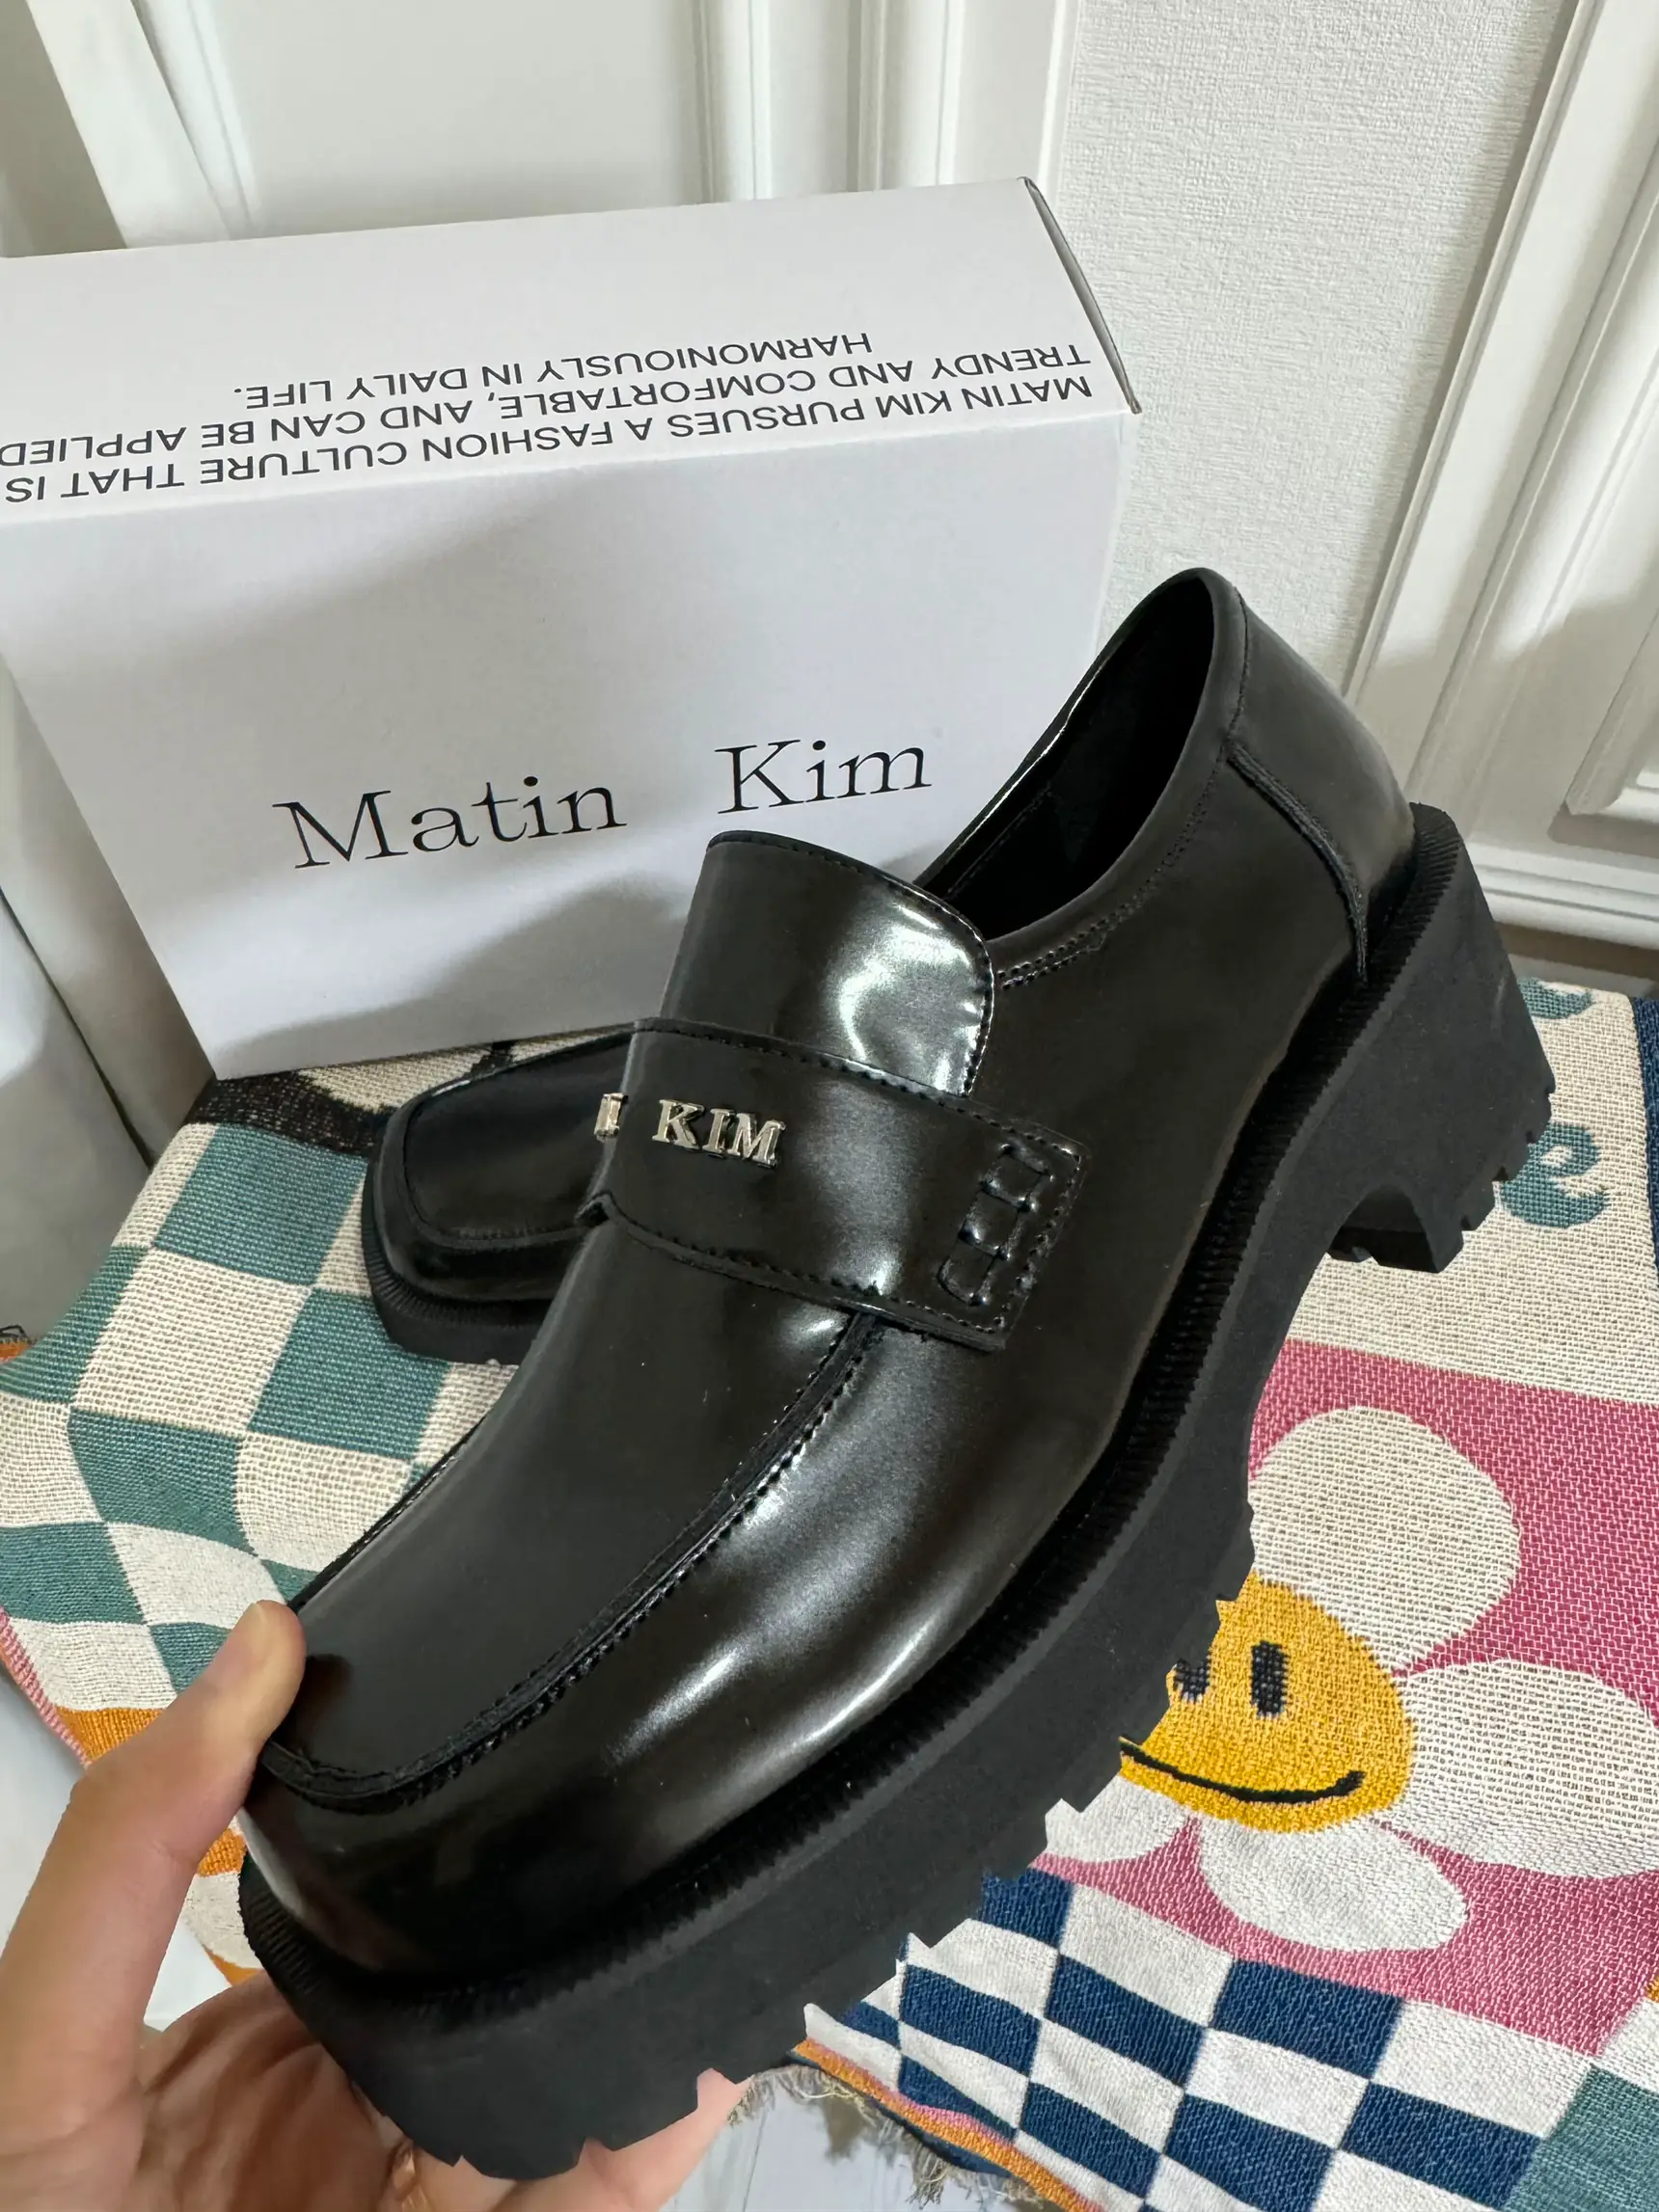 Matin Kim SQUARE LOAFER | Gallery posted by Suchada K. | Lemon8